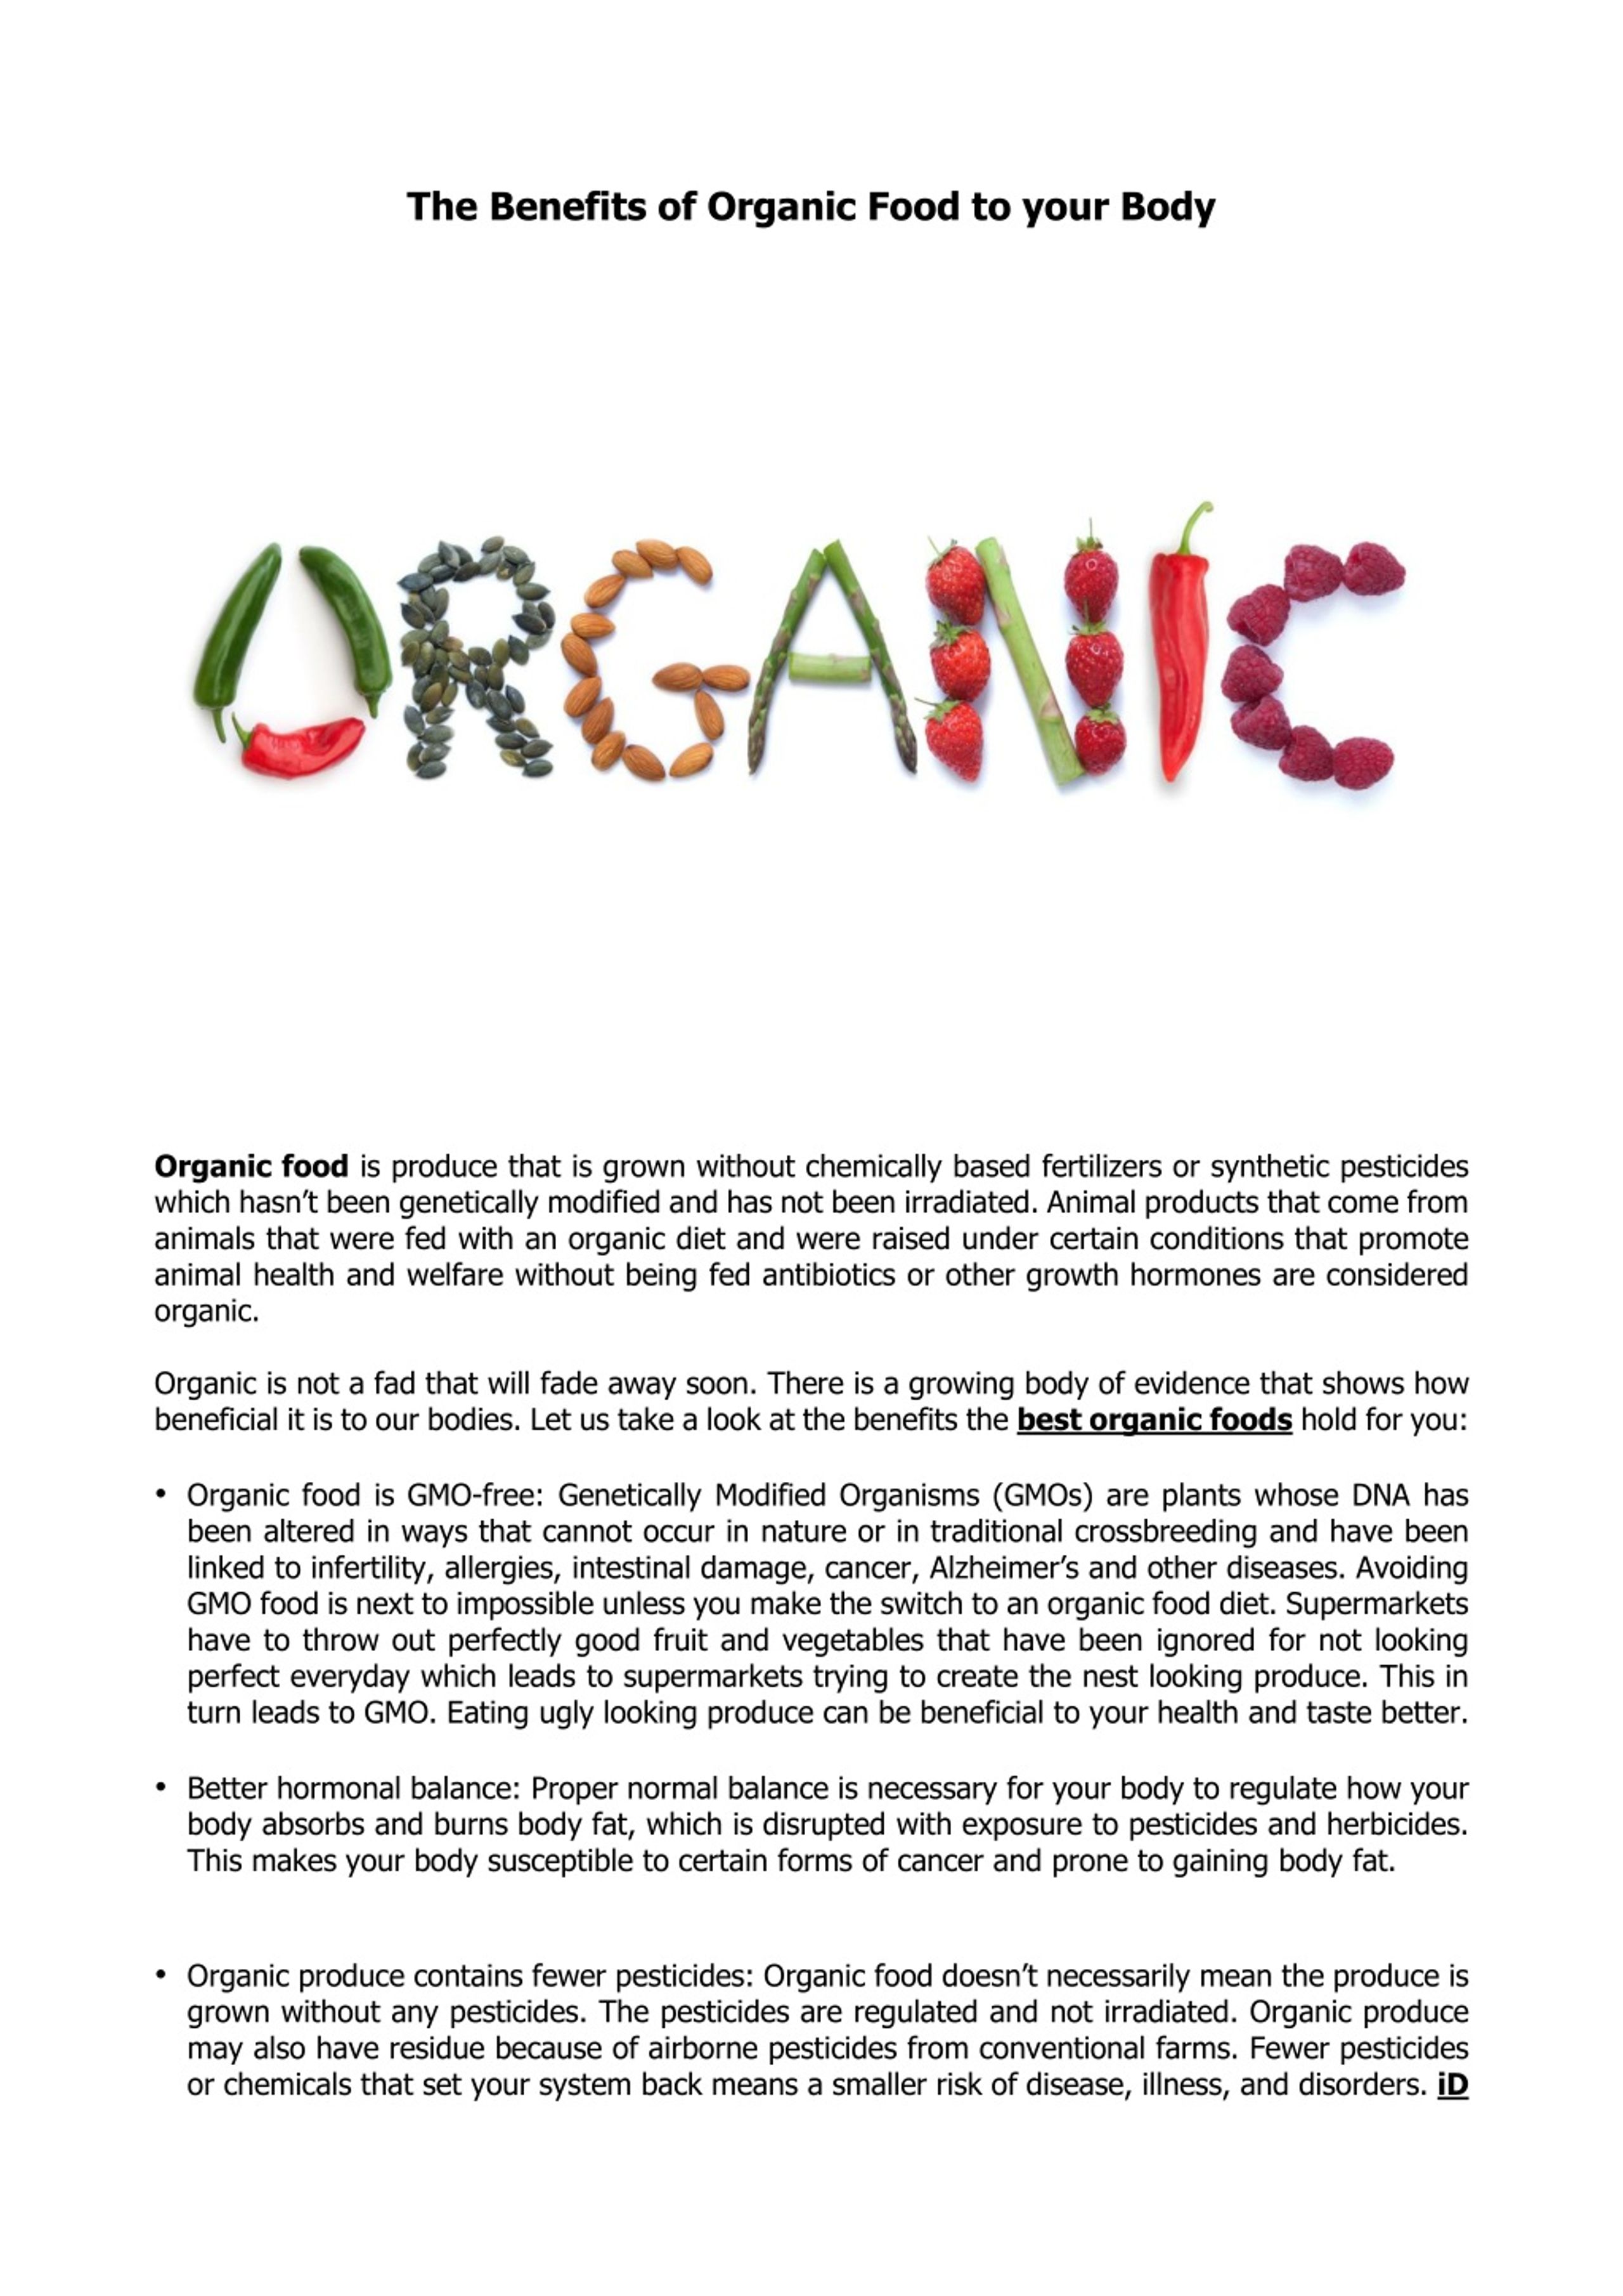 PPT - The Benefits of Organic Food to your Body PowerPoint